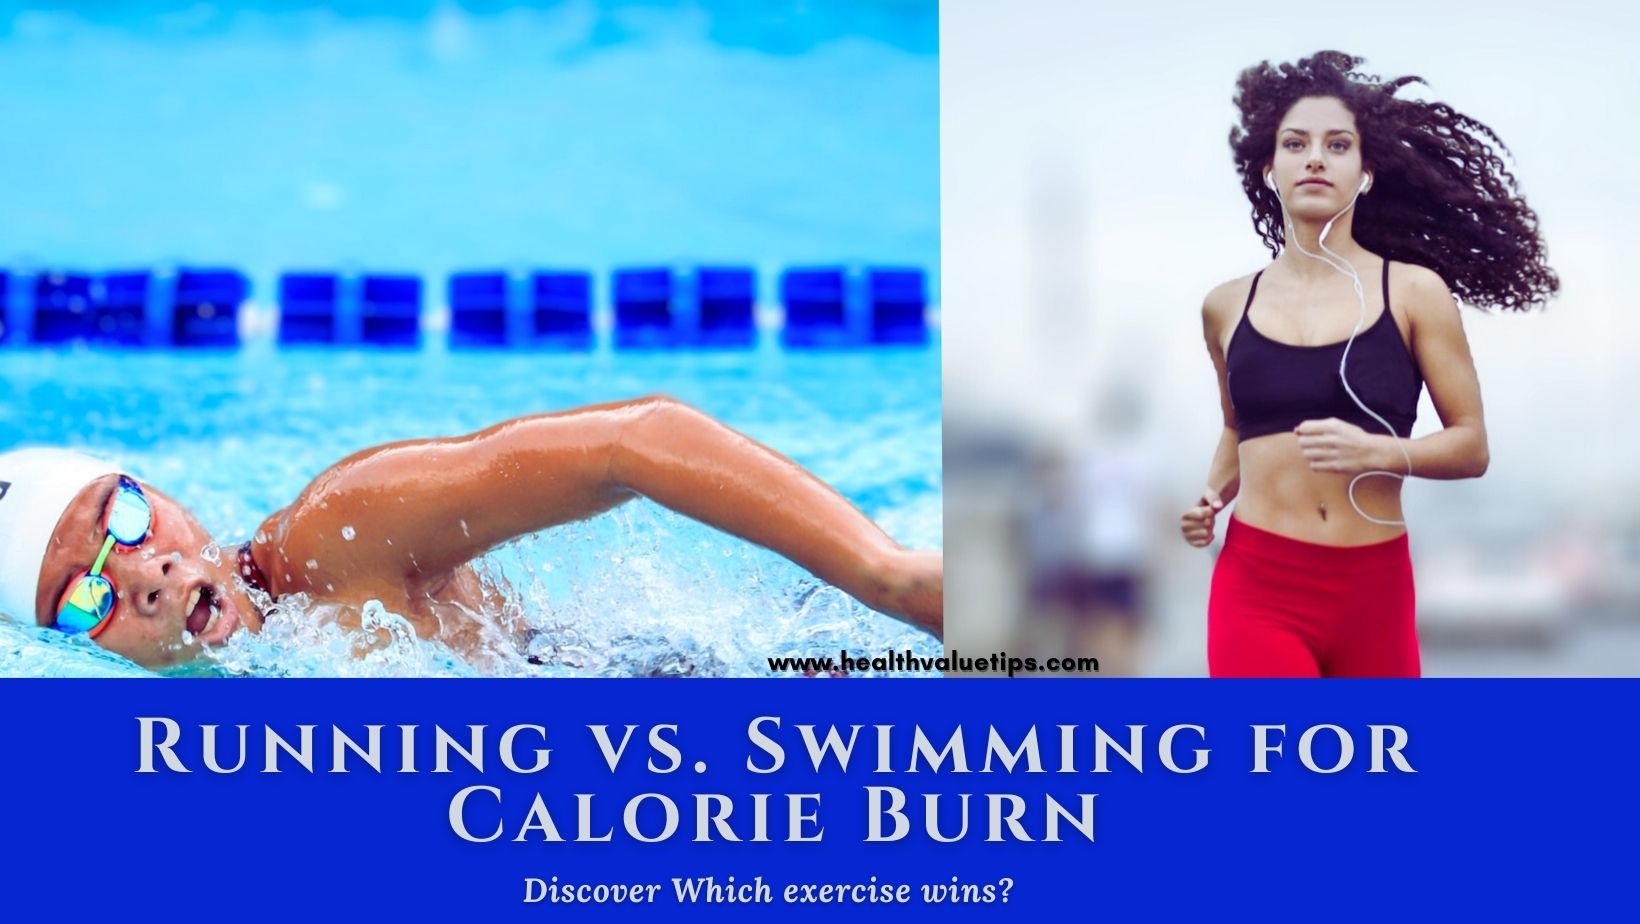 Running vs. Swimming for Calorie Burn: Discover Which exercise wins